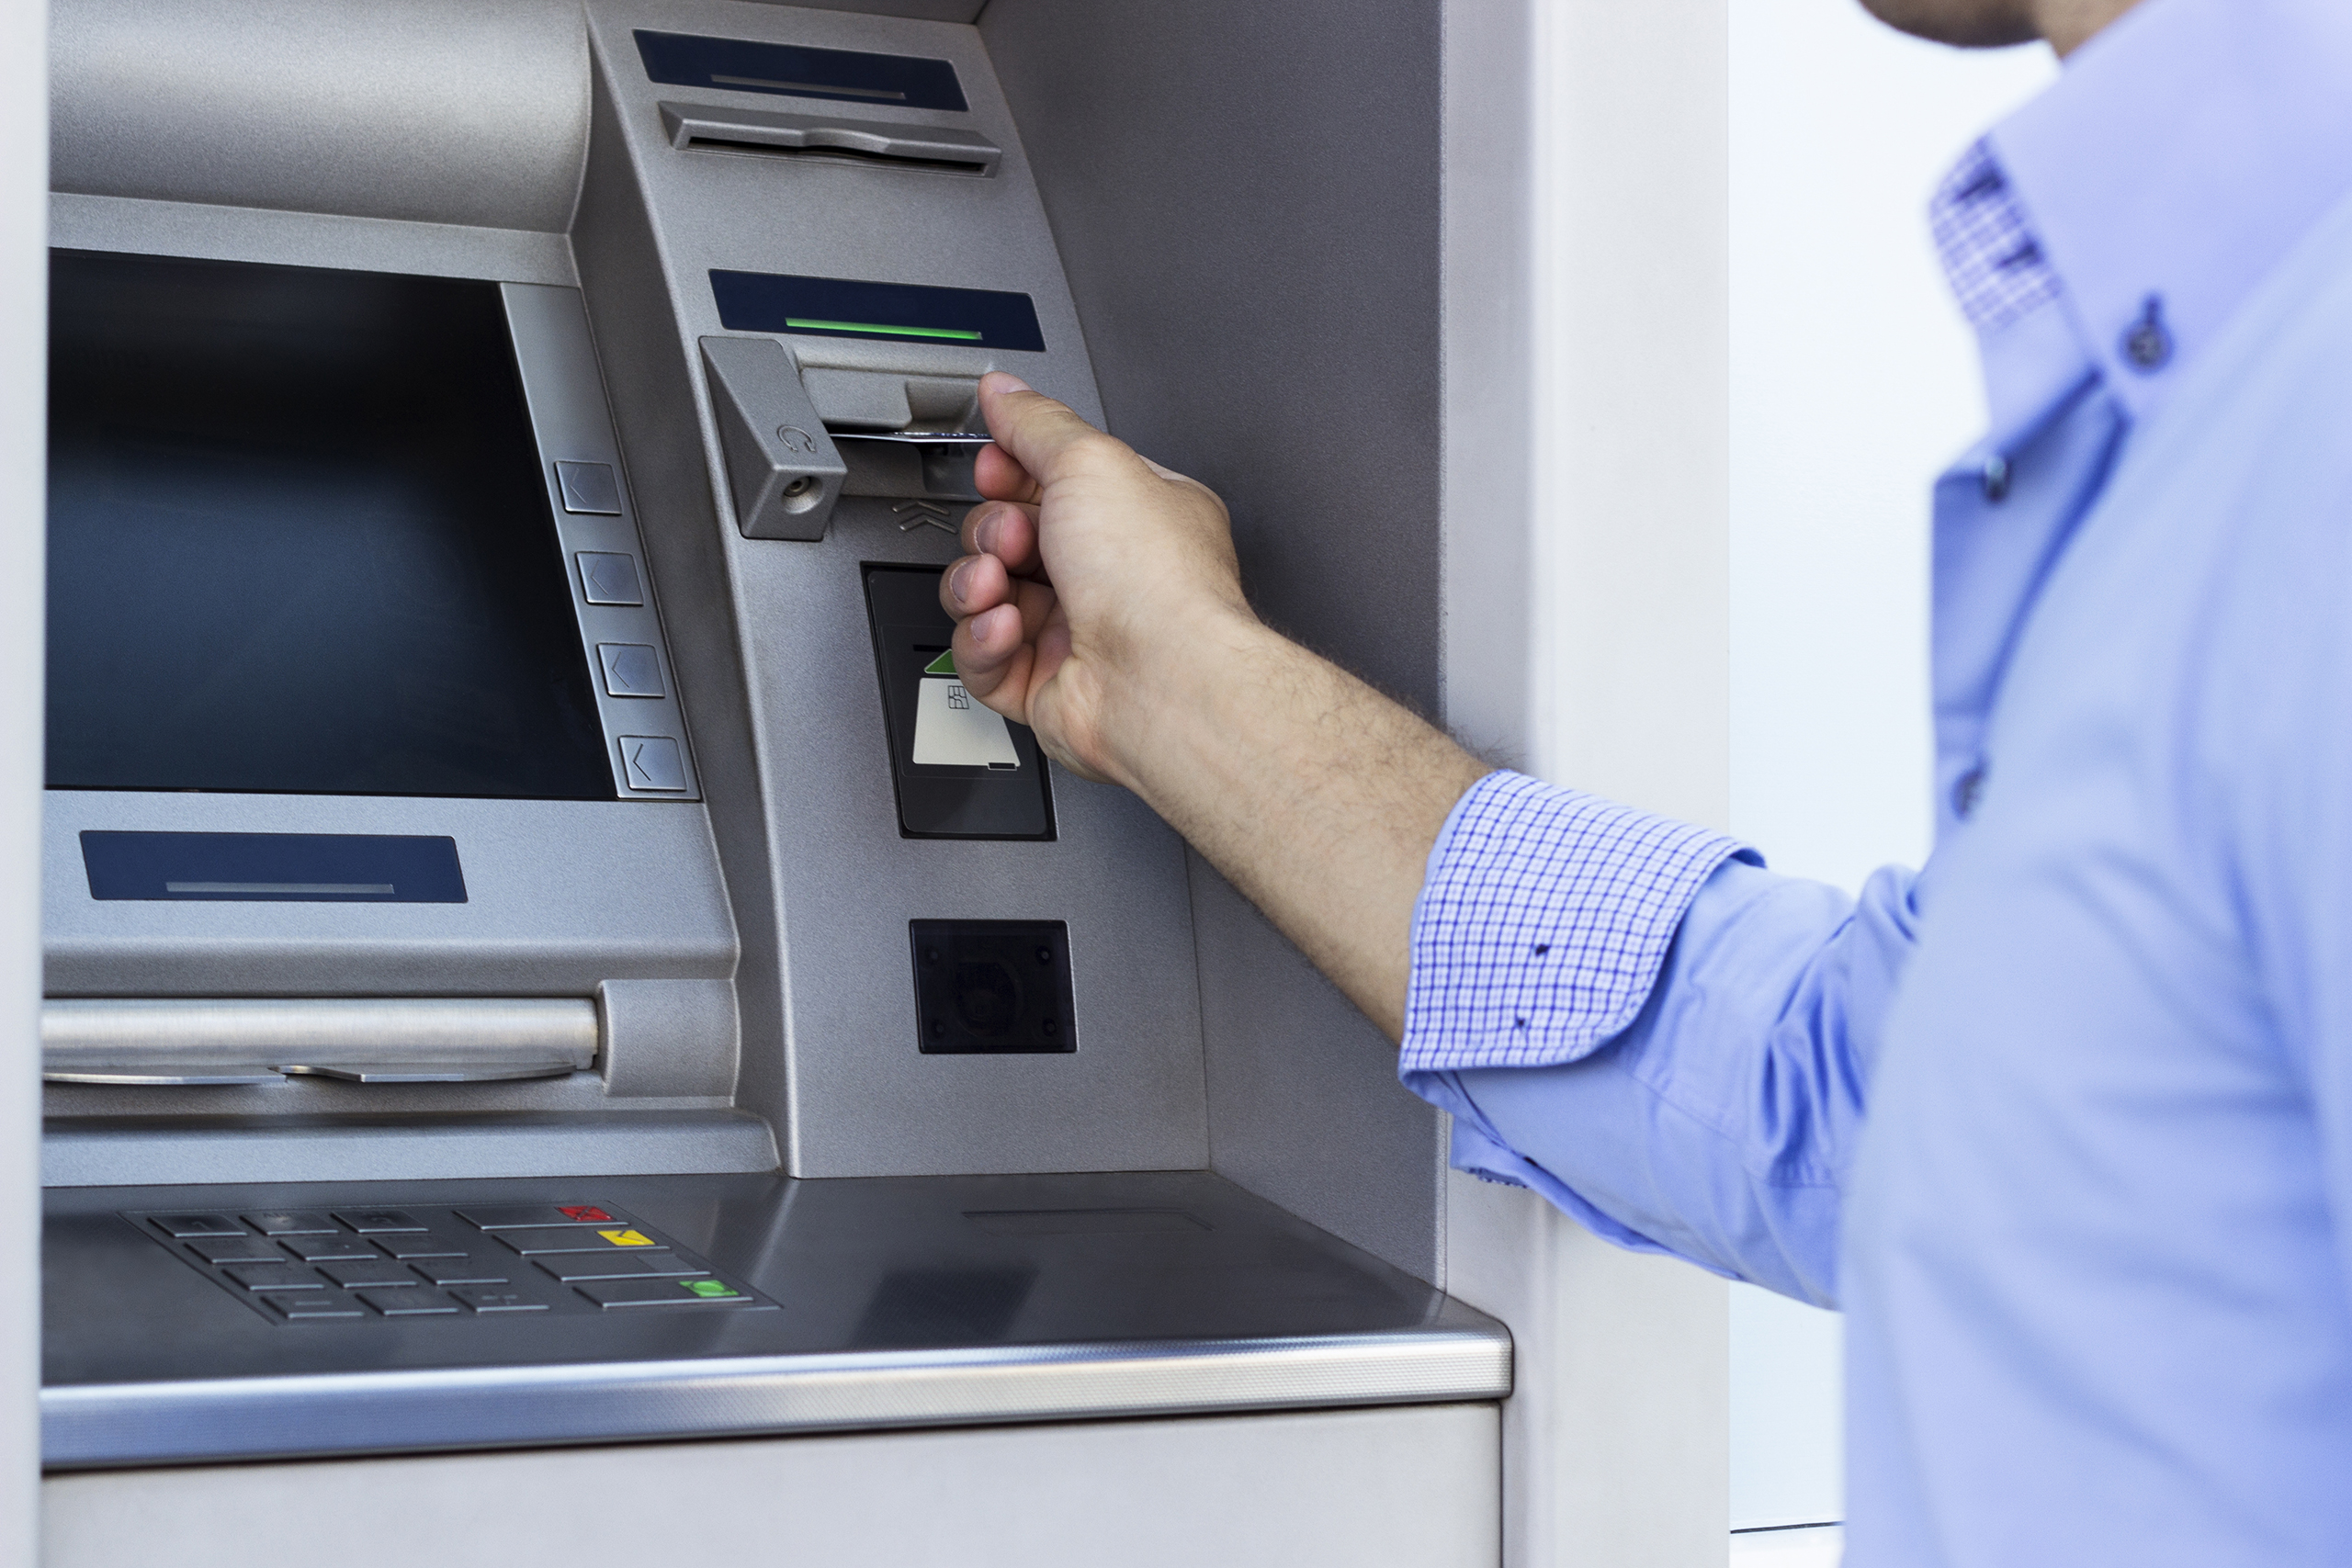 Big Banks Made a Ton of Money Last Year From ATM and Overdraft Fees